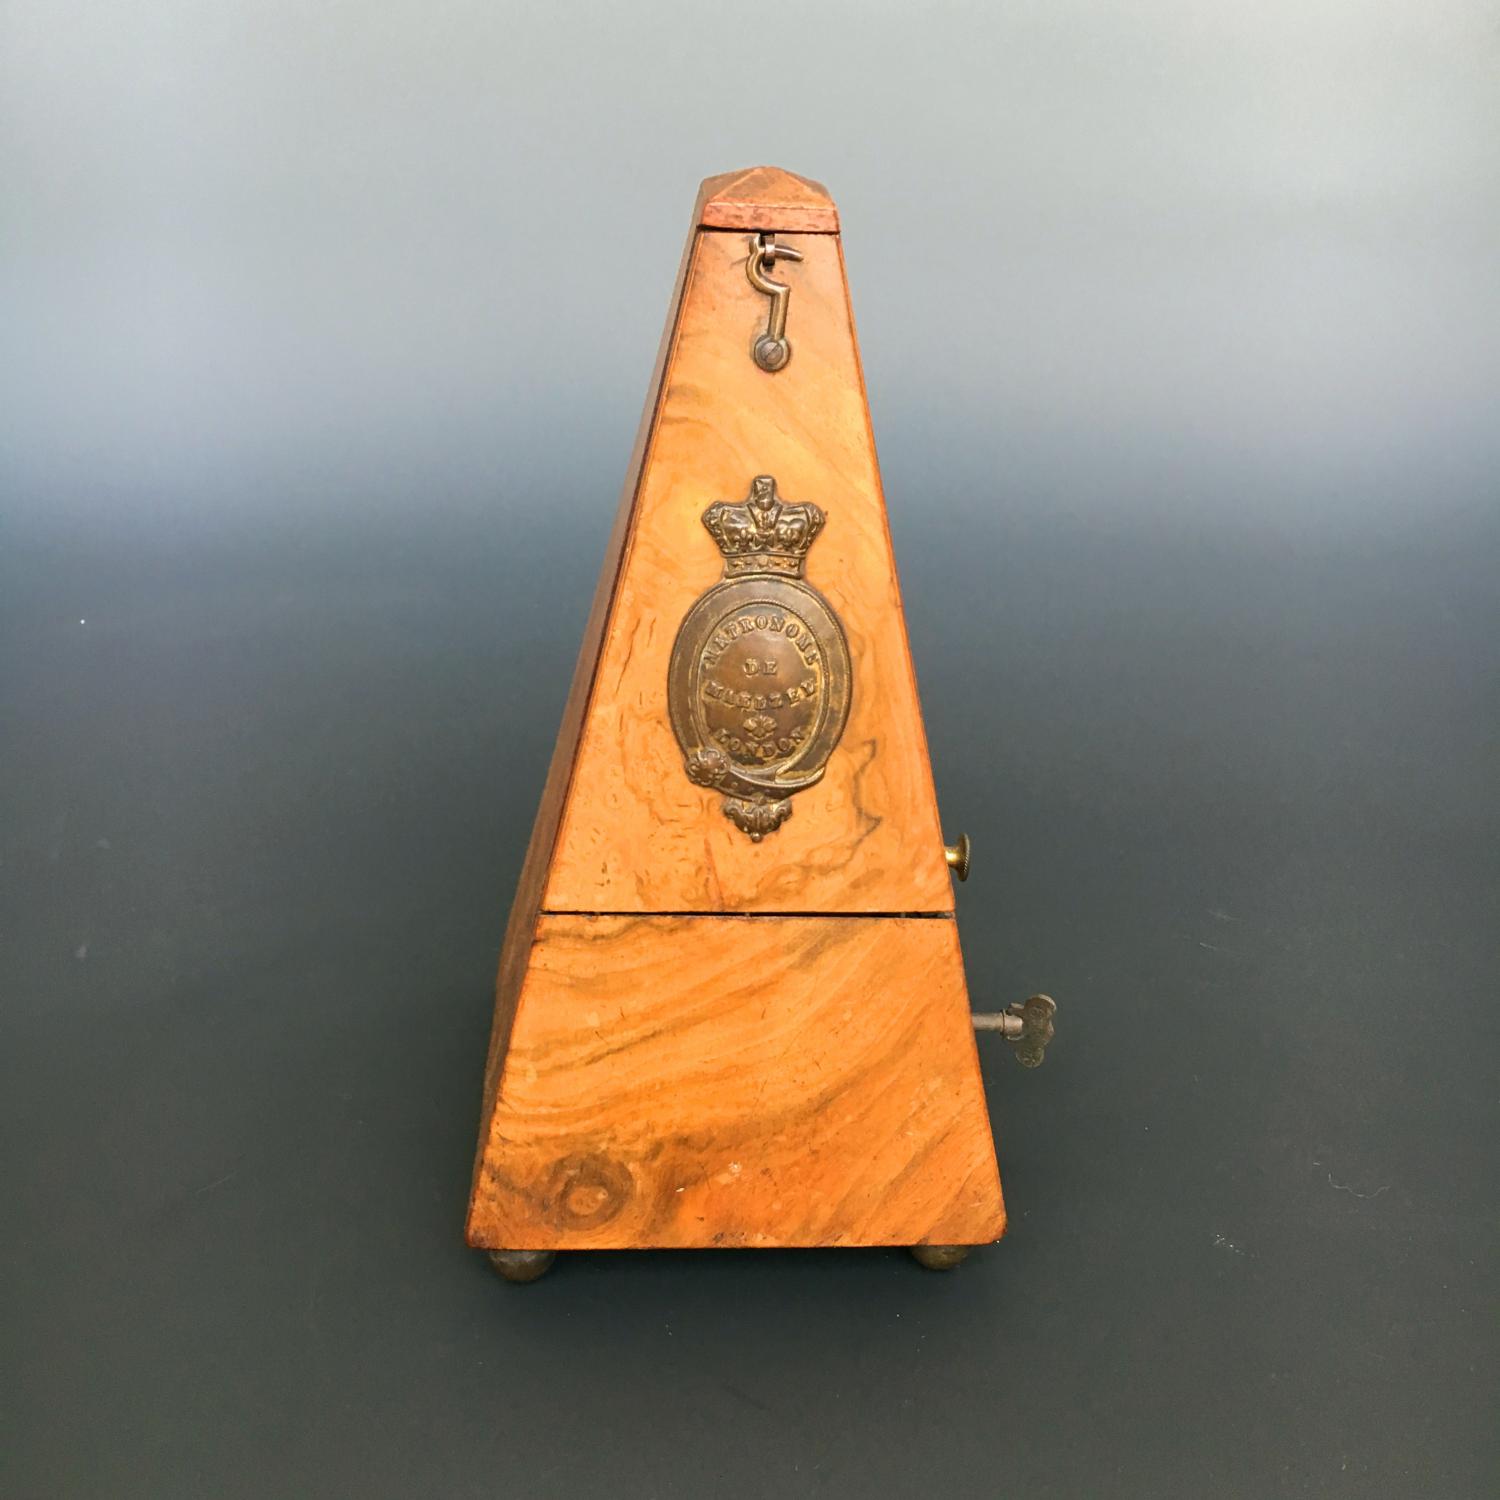 Metronome Demaelzel sold by G. Butler London